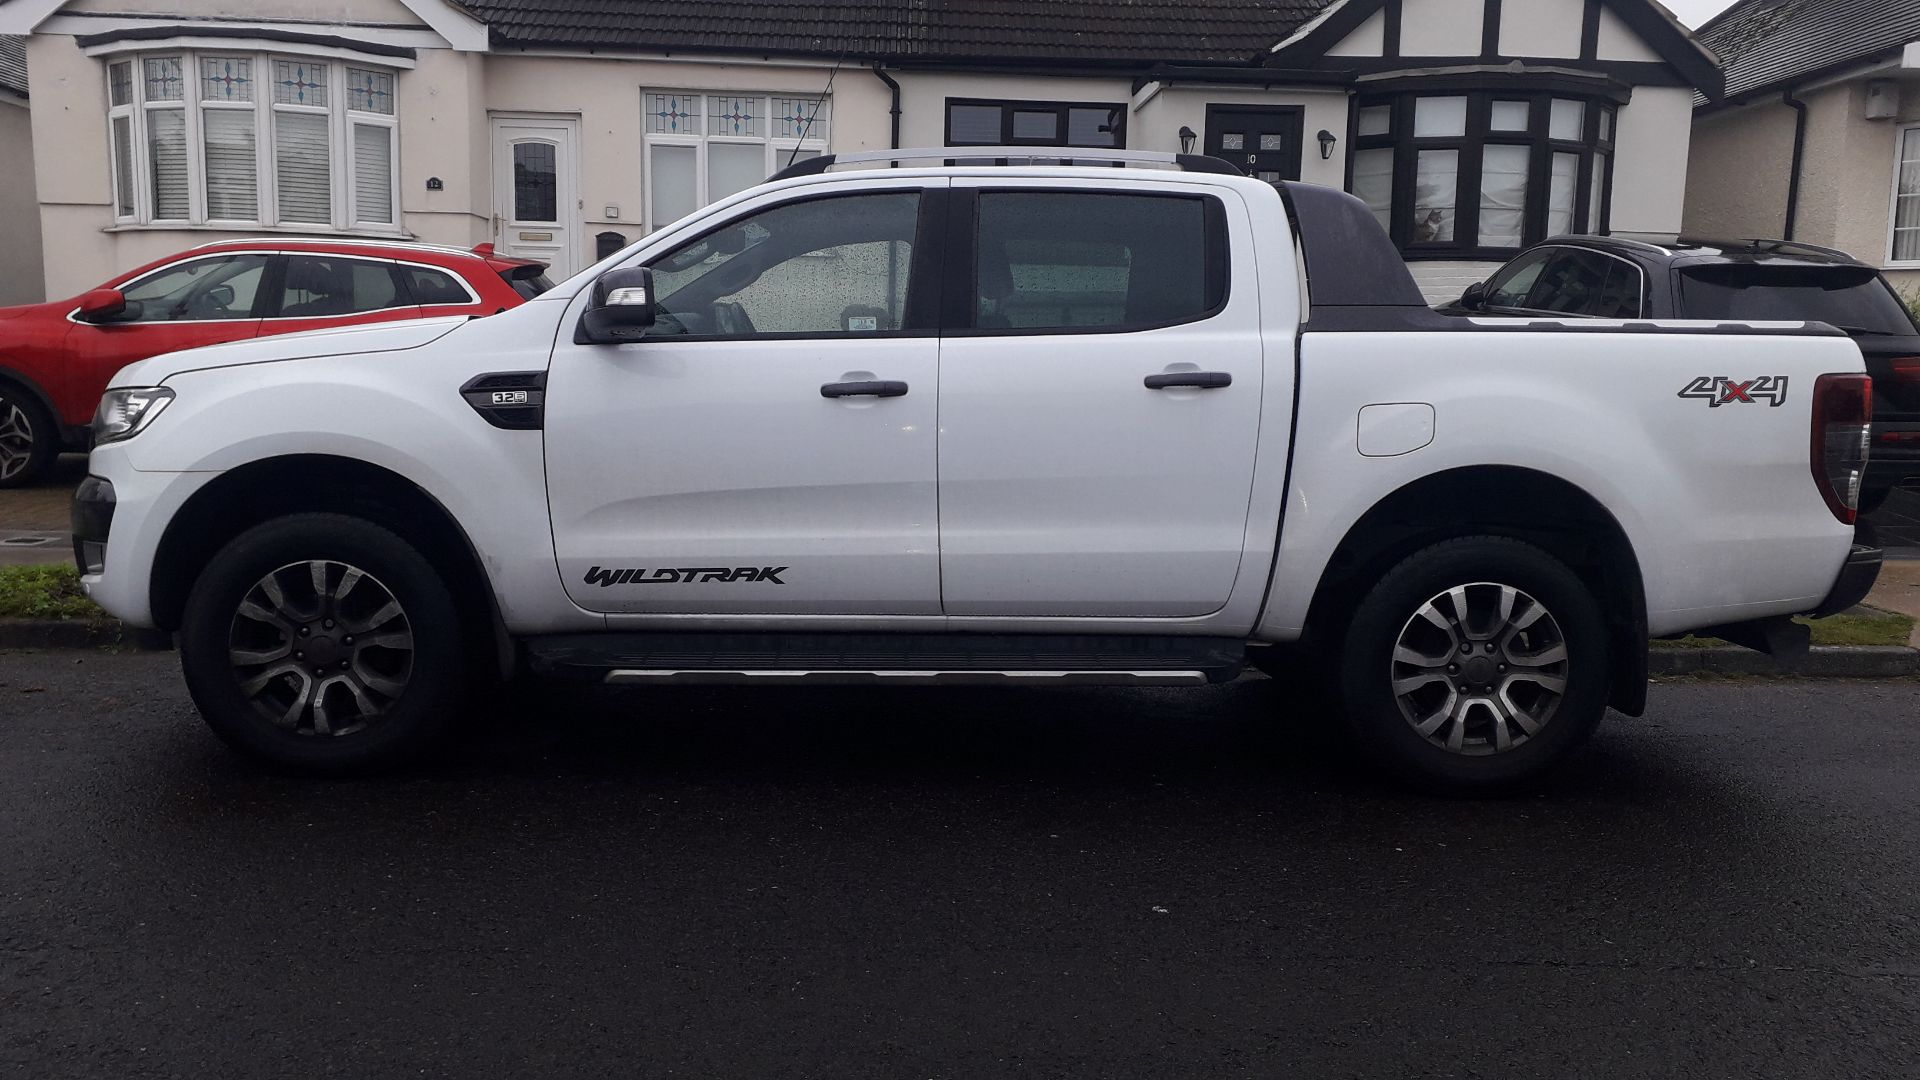 Ford Ranger Wildtrak 3.2 TDCi 200 Auto Double Cab Pick Up (2017) - Image 4 of 26